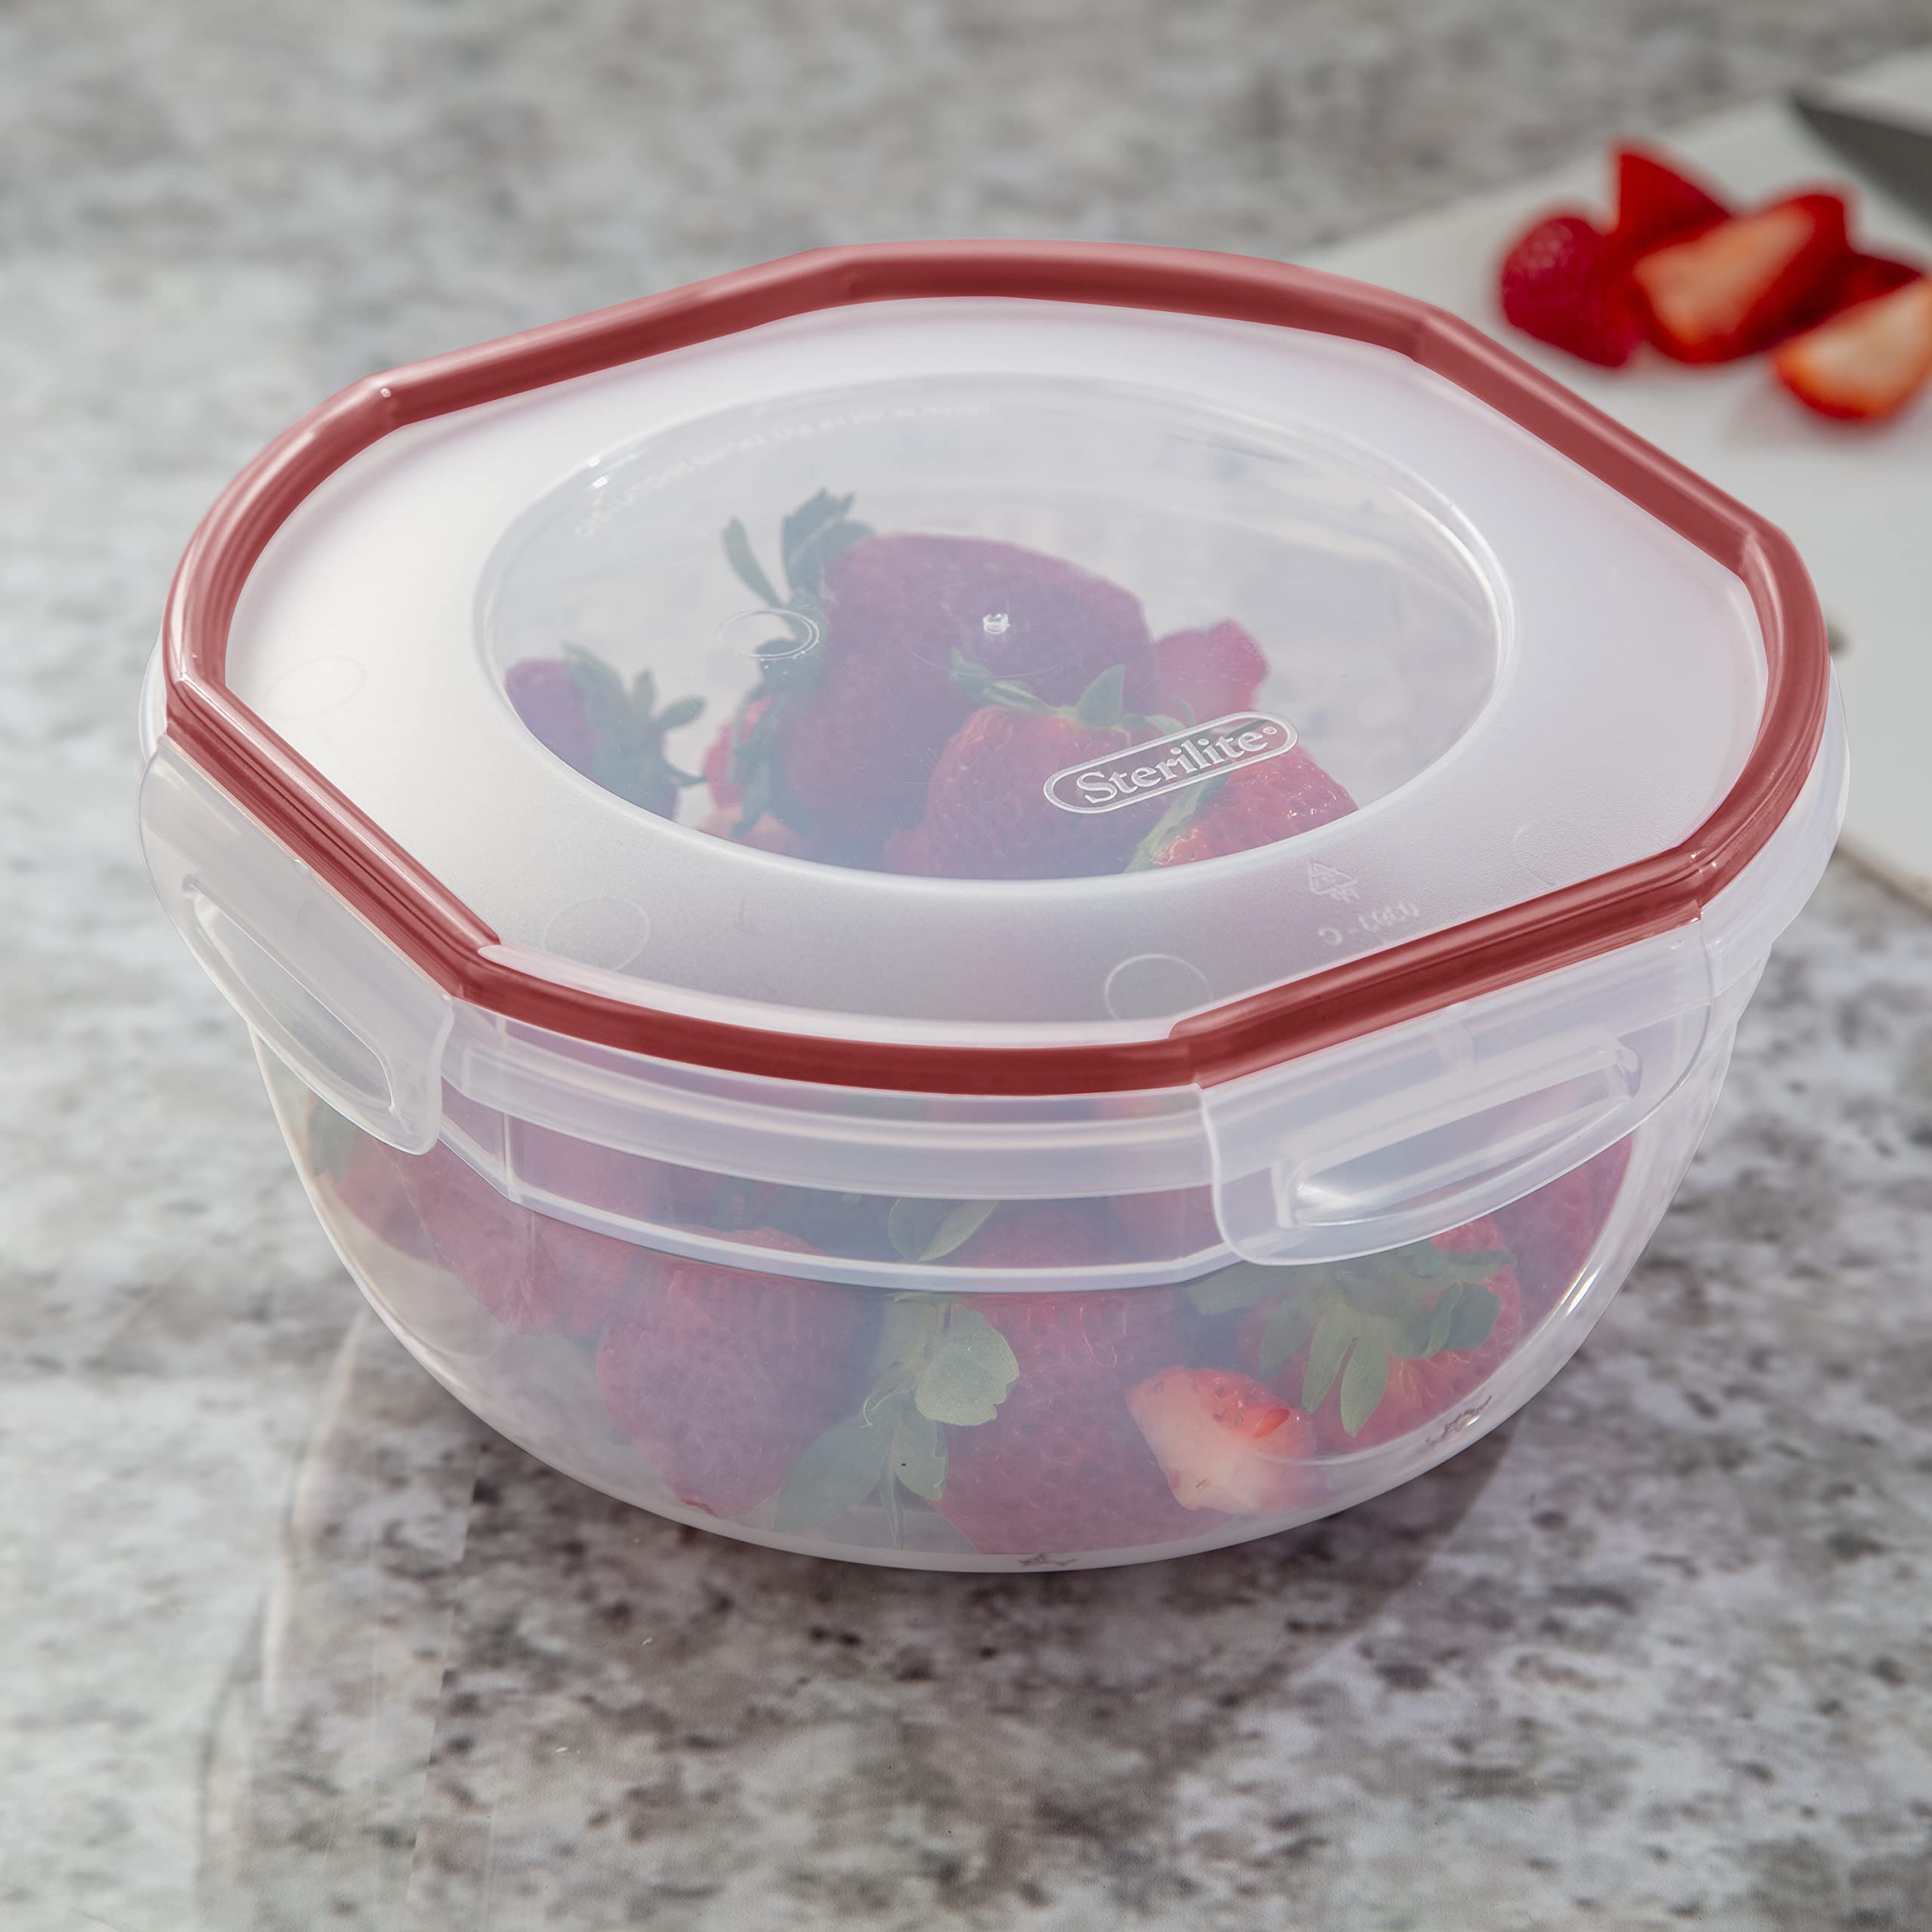 Sterilite 0 Ultra-Seal 2.5 Quart Bowl, Clear Lid & Base with Rocket Red Gasket, 4-Pack